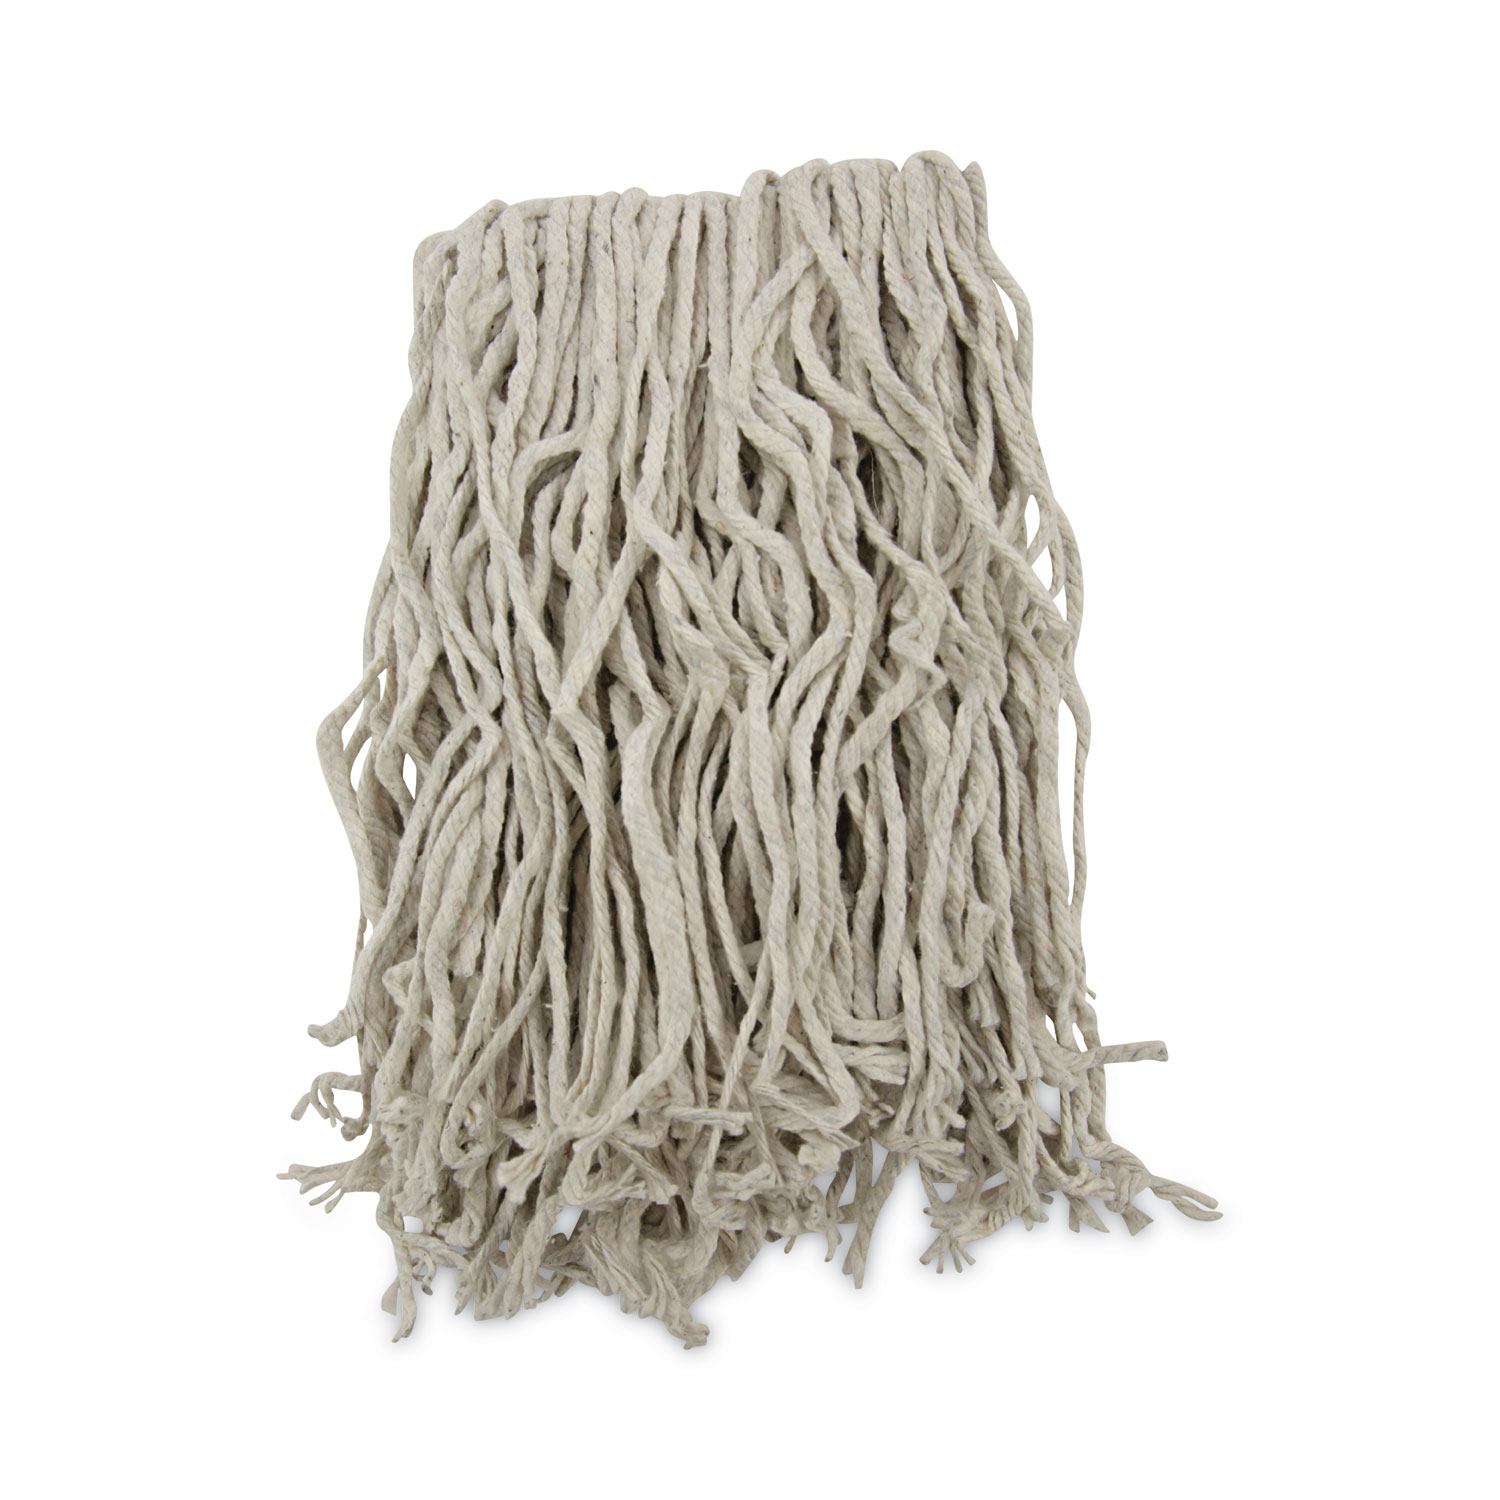 Details about   Cotton Mop Head Narrow Band #24 CM-2024S16 from ABC 